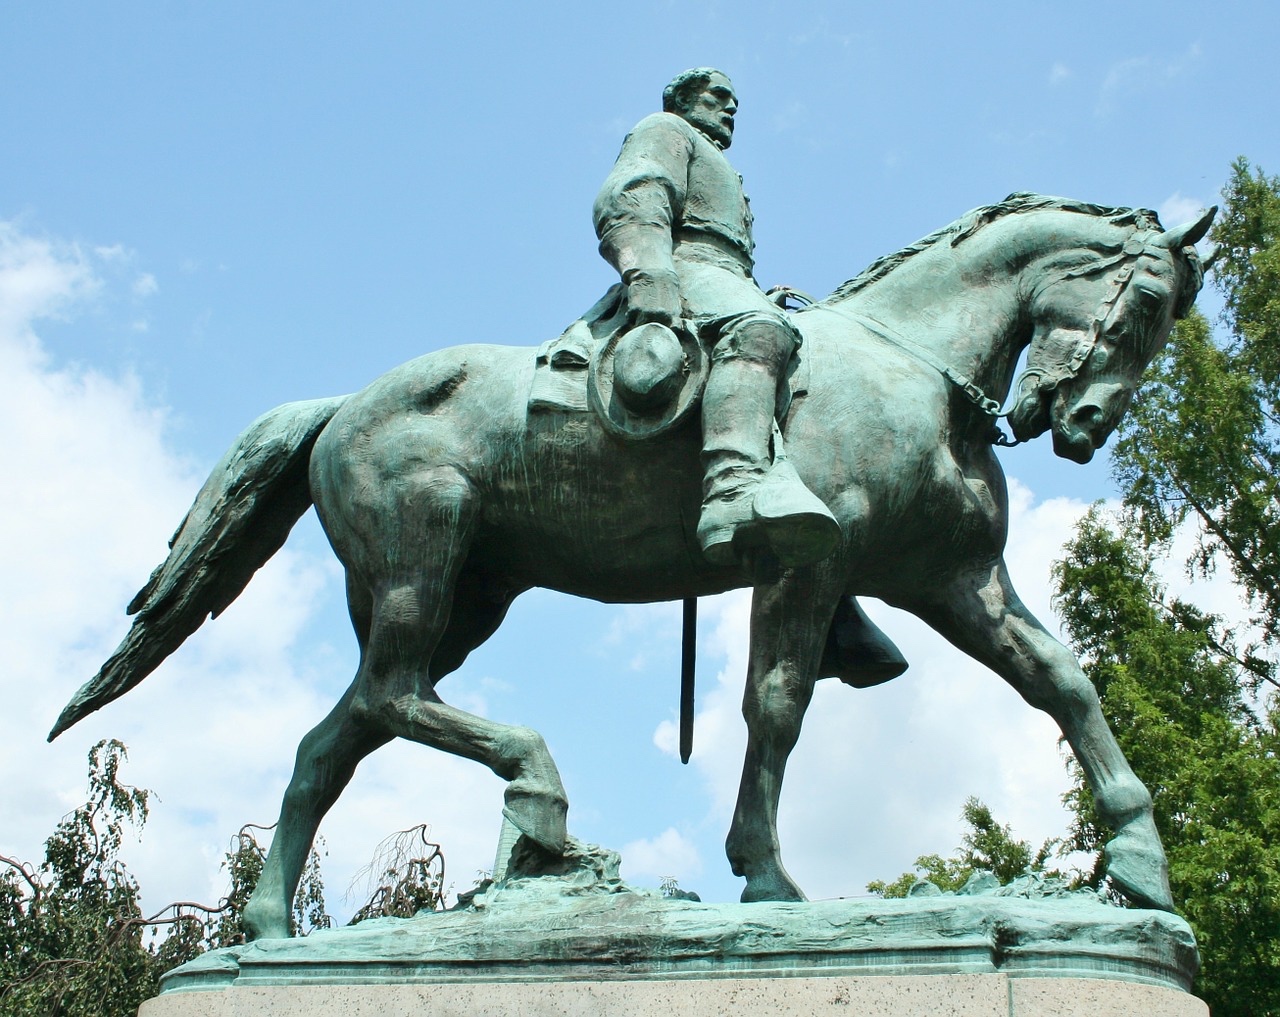 Confederate Monuments and the Plank in our Eyes